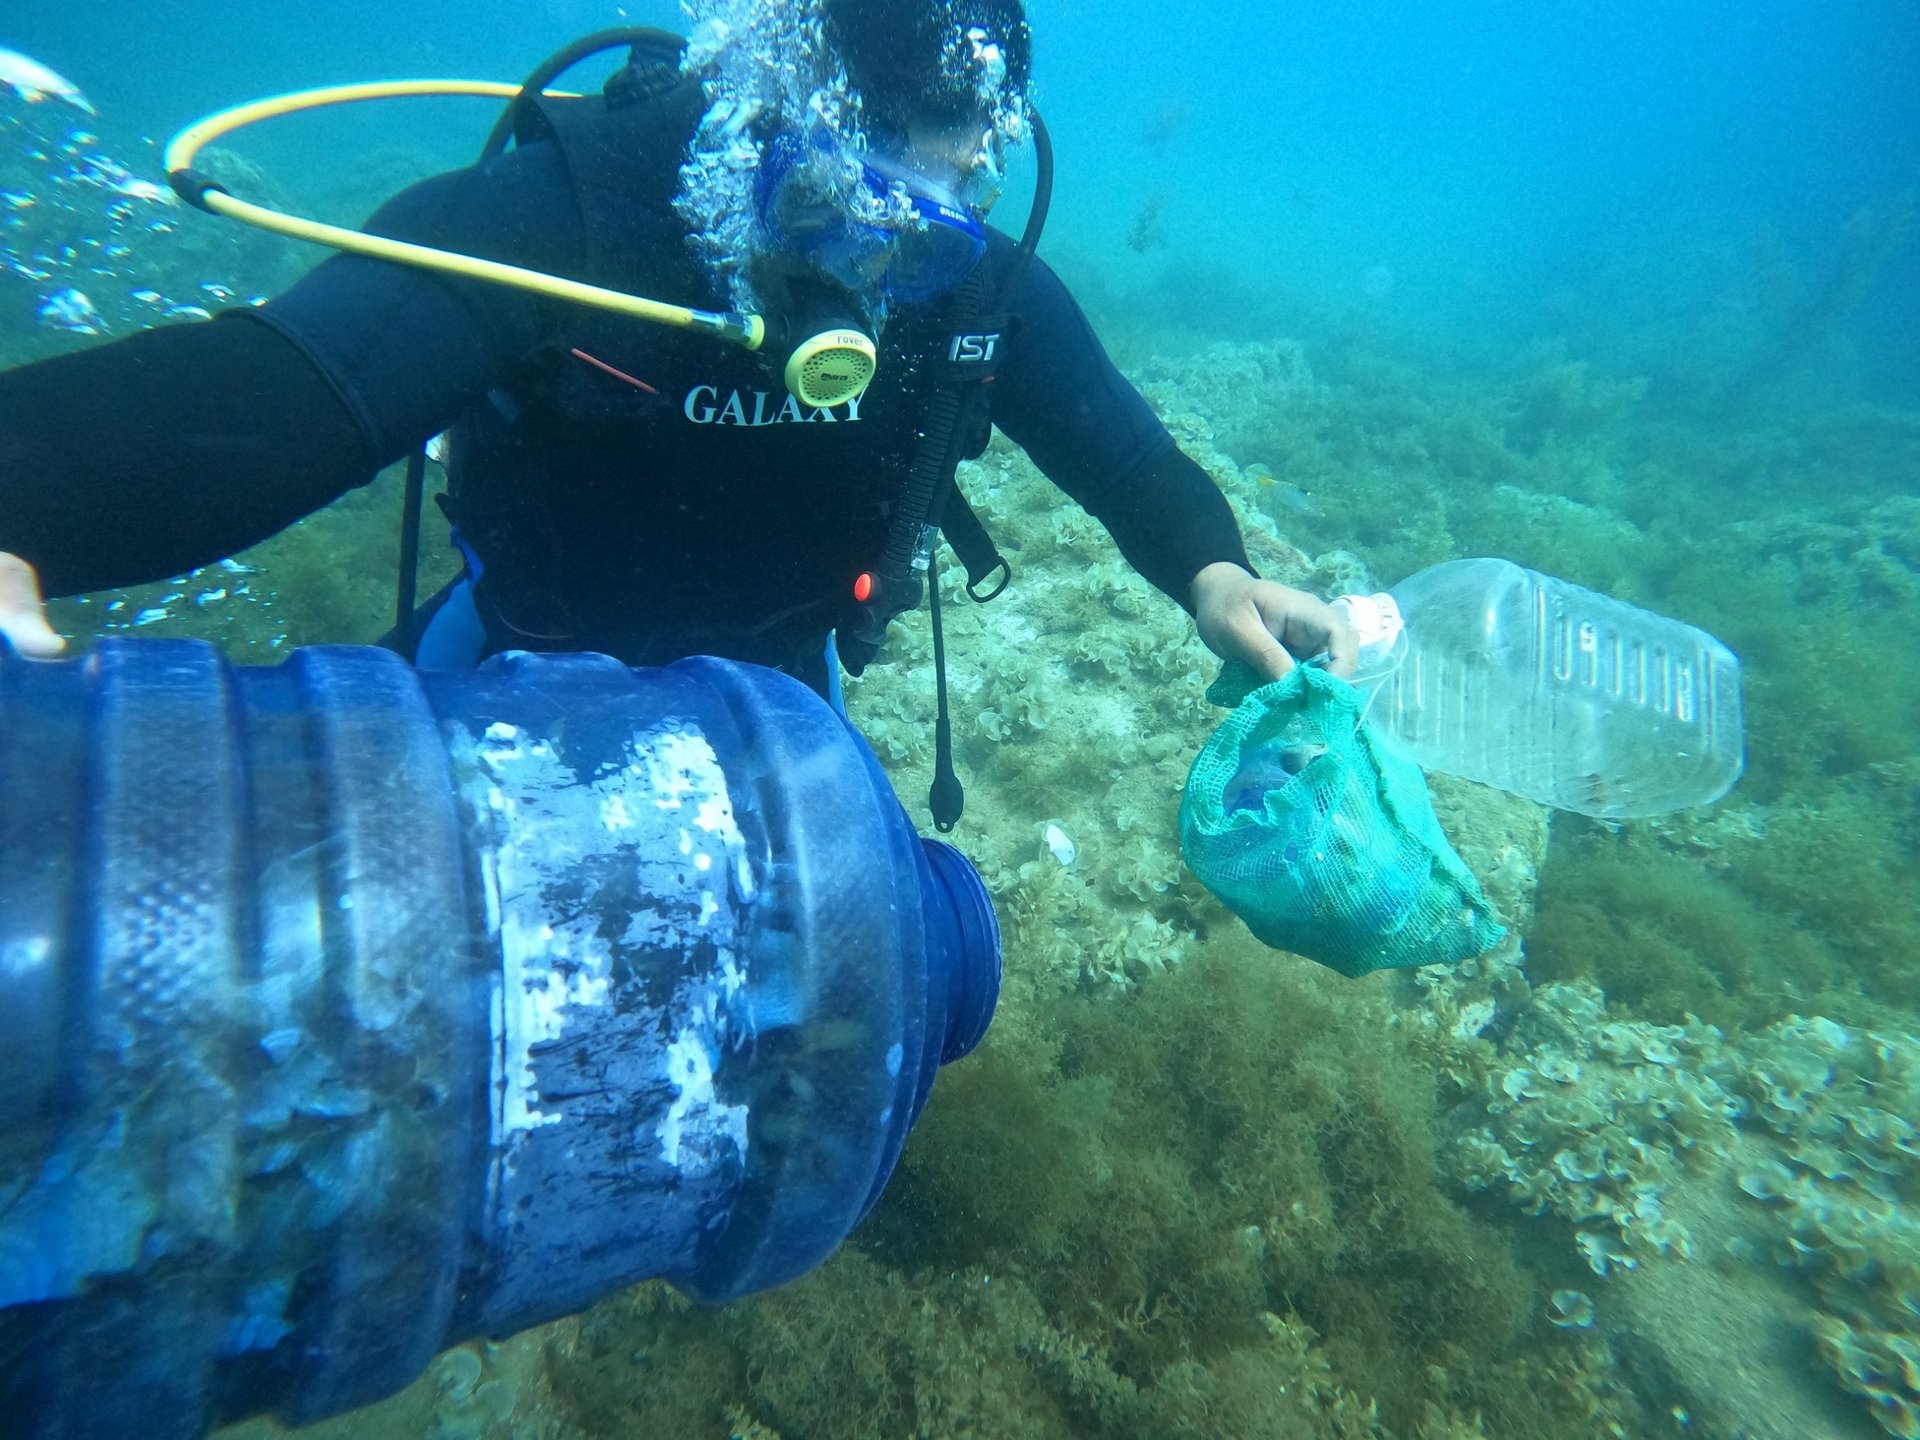 During each cleaning dive within the buffer zone, the coral protection team collects between 30 and 40 kilograms of litter. Photo: Vu Dinh Thung.